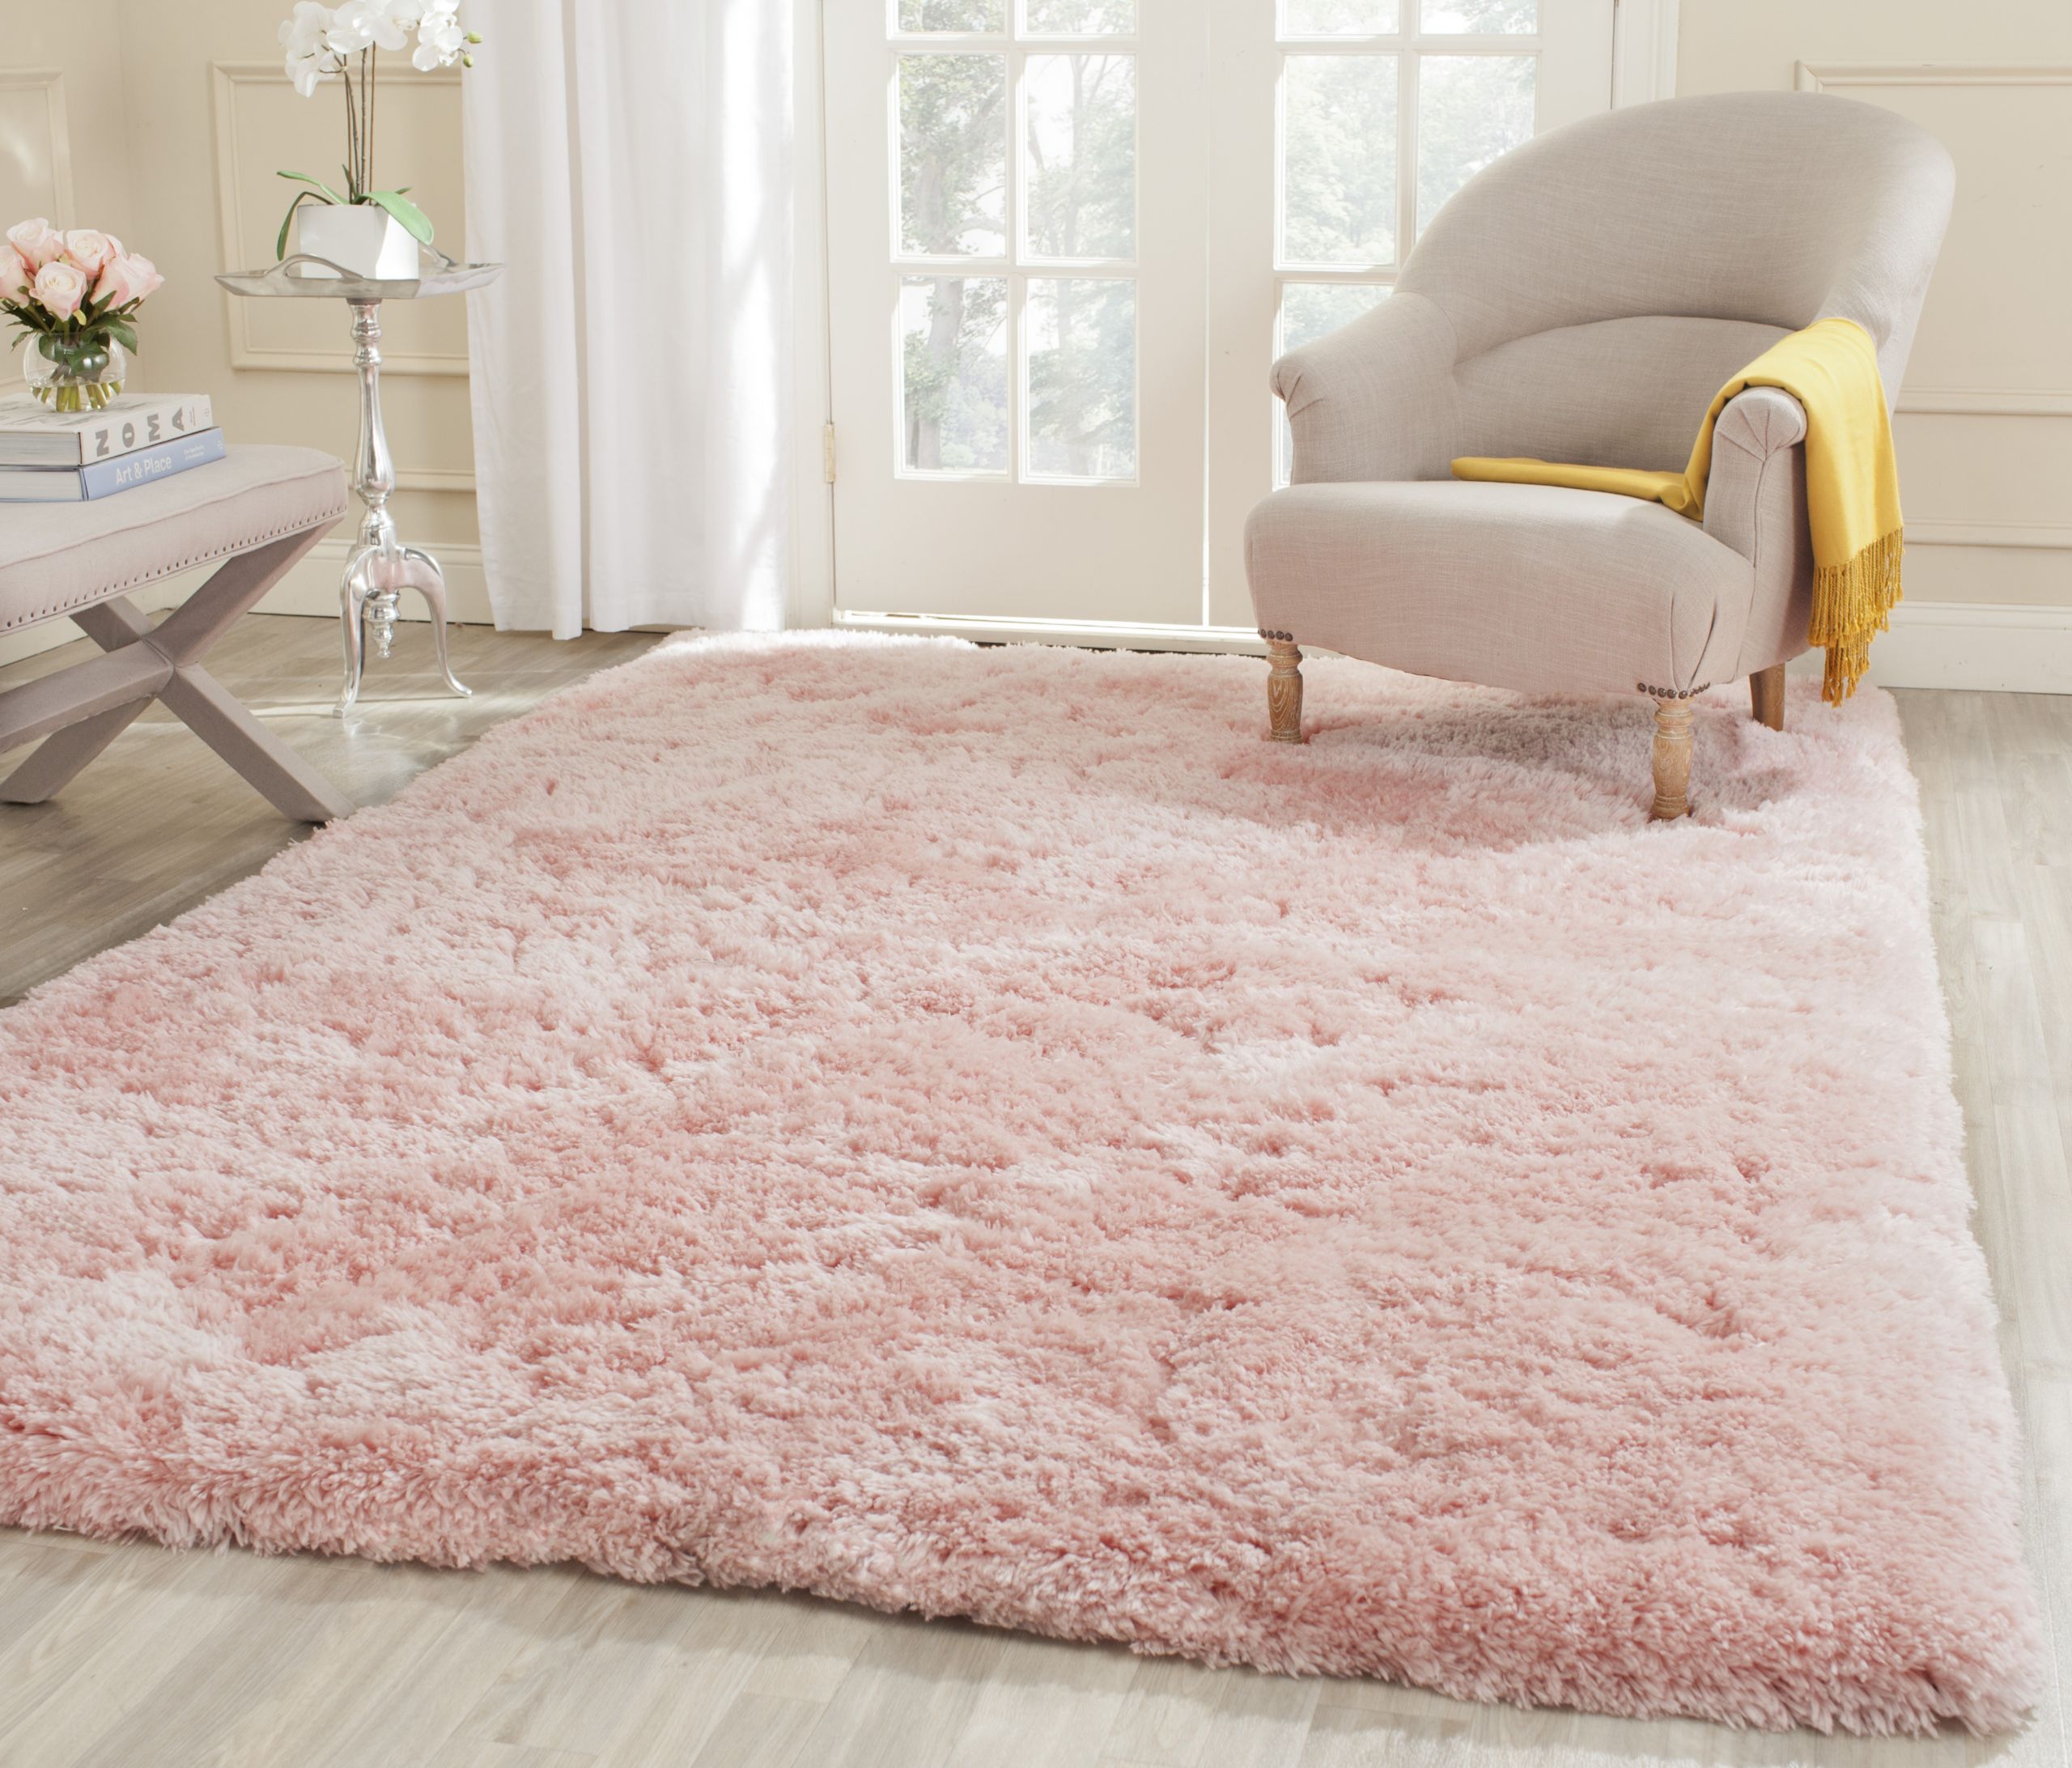 Girls Bedroom Area Rugs
 Safavieh Hand Tufted PINK Polyster Shag Area Rugs SG270P